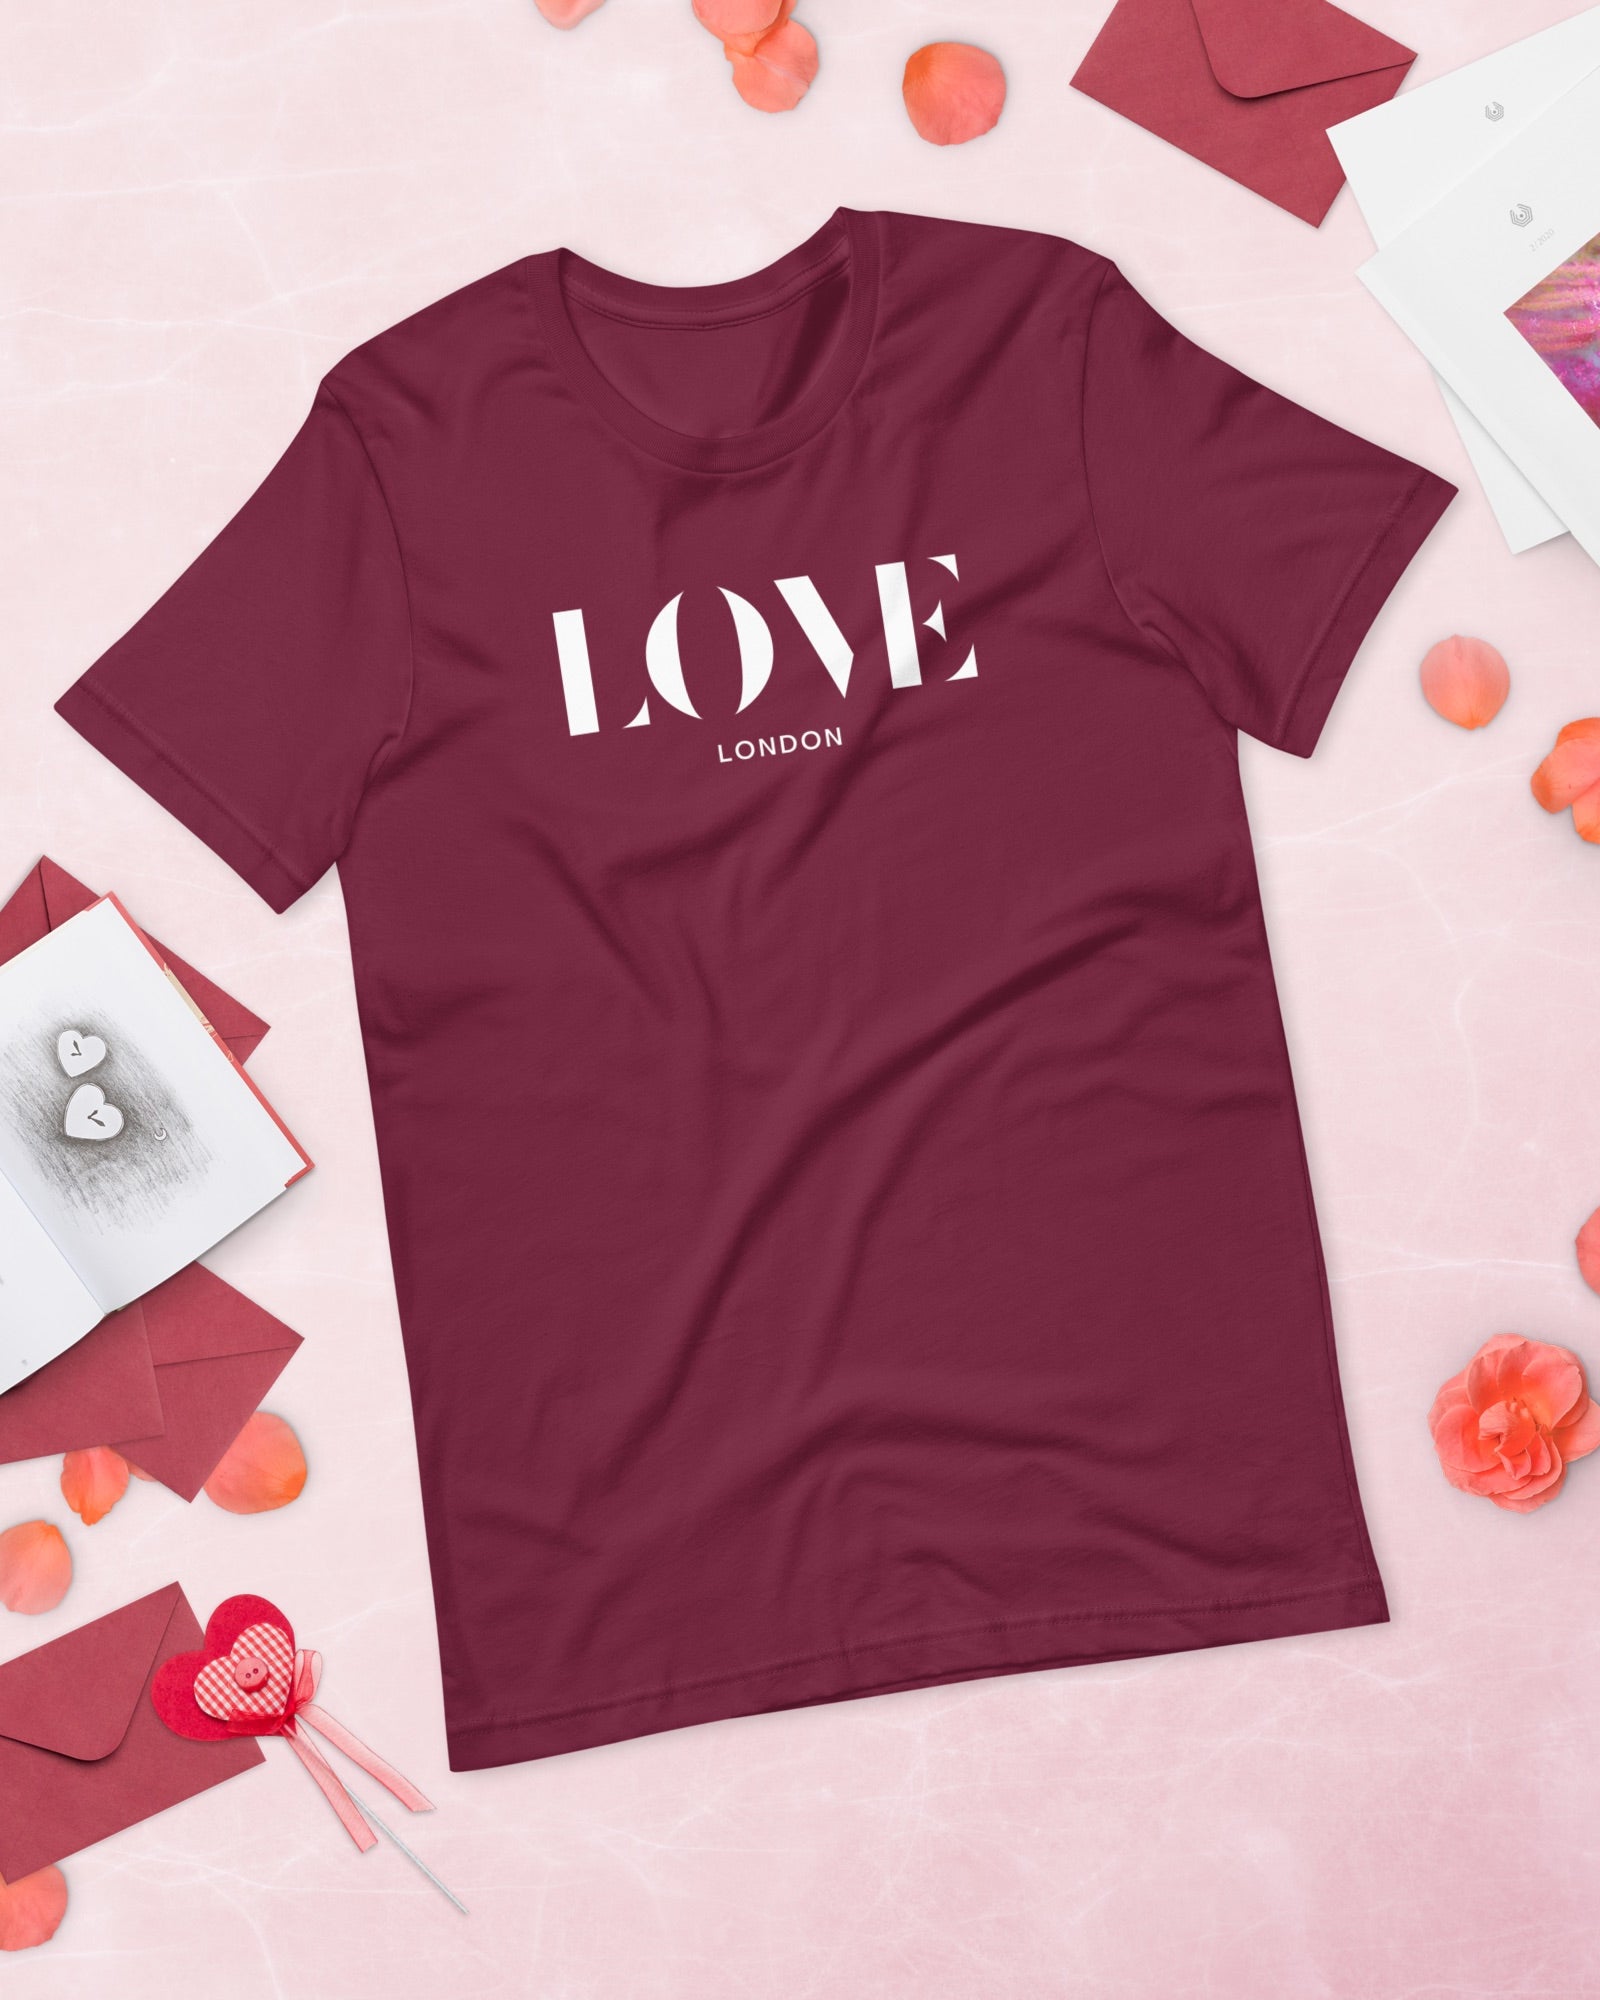 Our London Gift Shop collection brings together all the lovely items we sell that are London-specific, including our popular Love London t-shirts